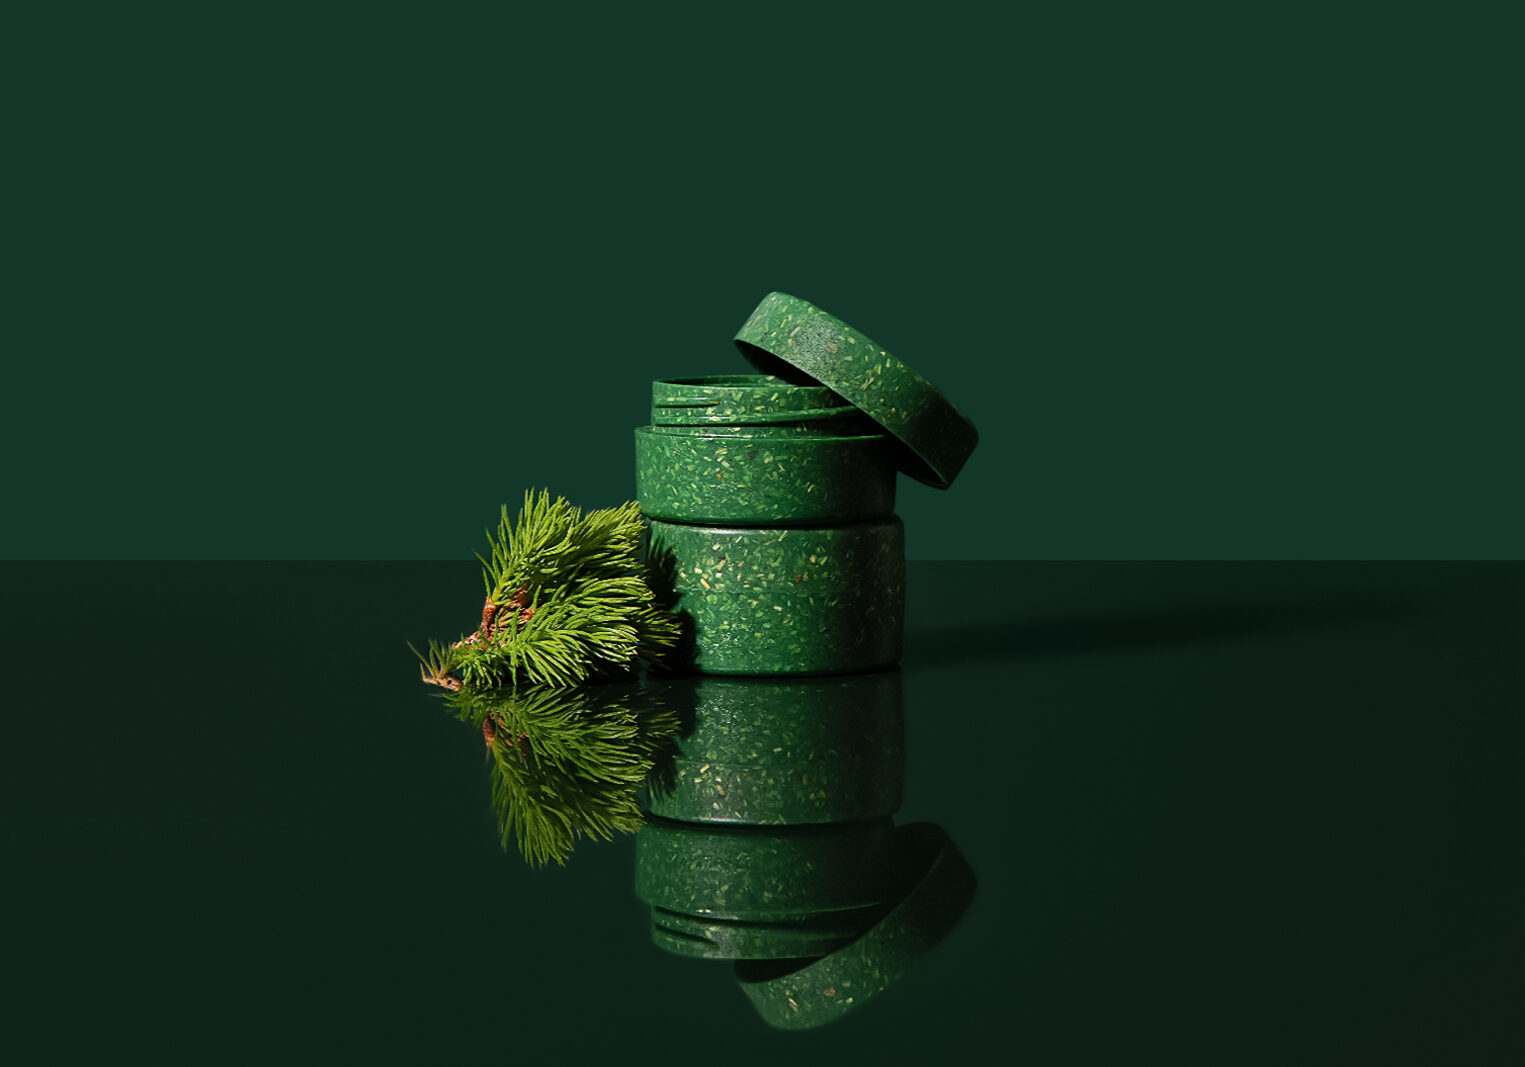 Nature themed product photo showcasing a biodegradable cosmetics jar and greenery found in Finnish forests.